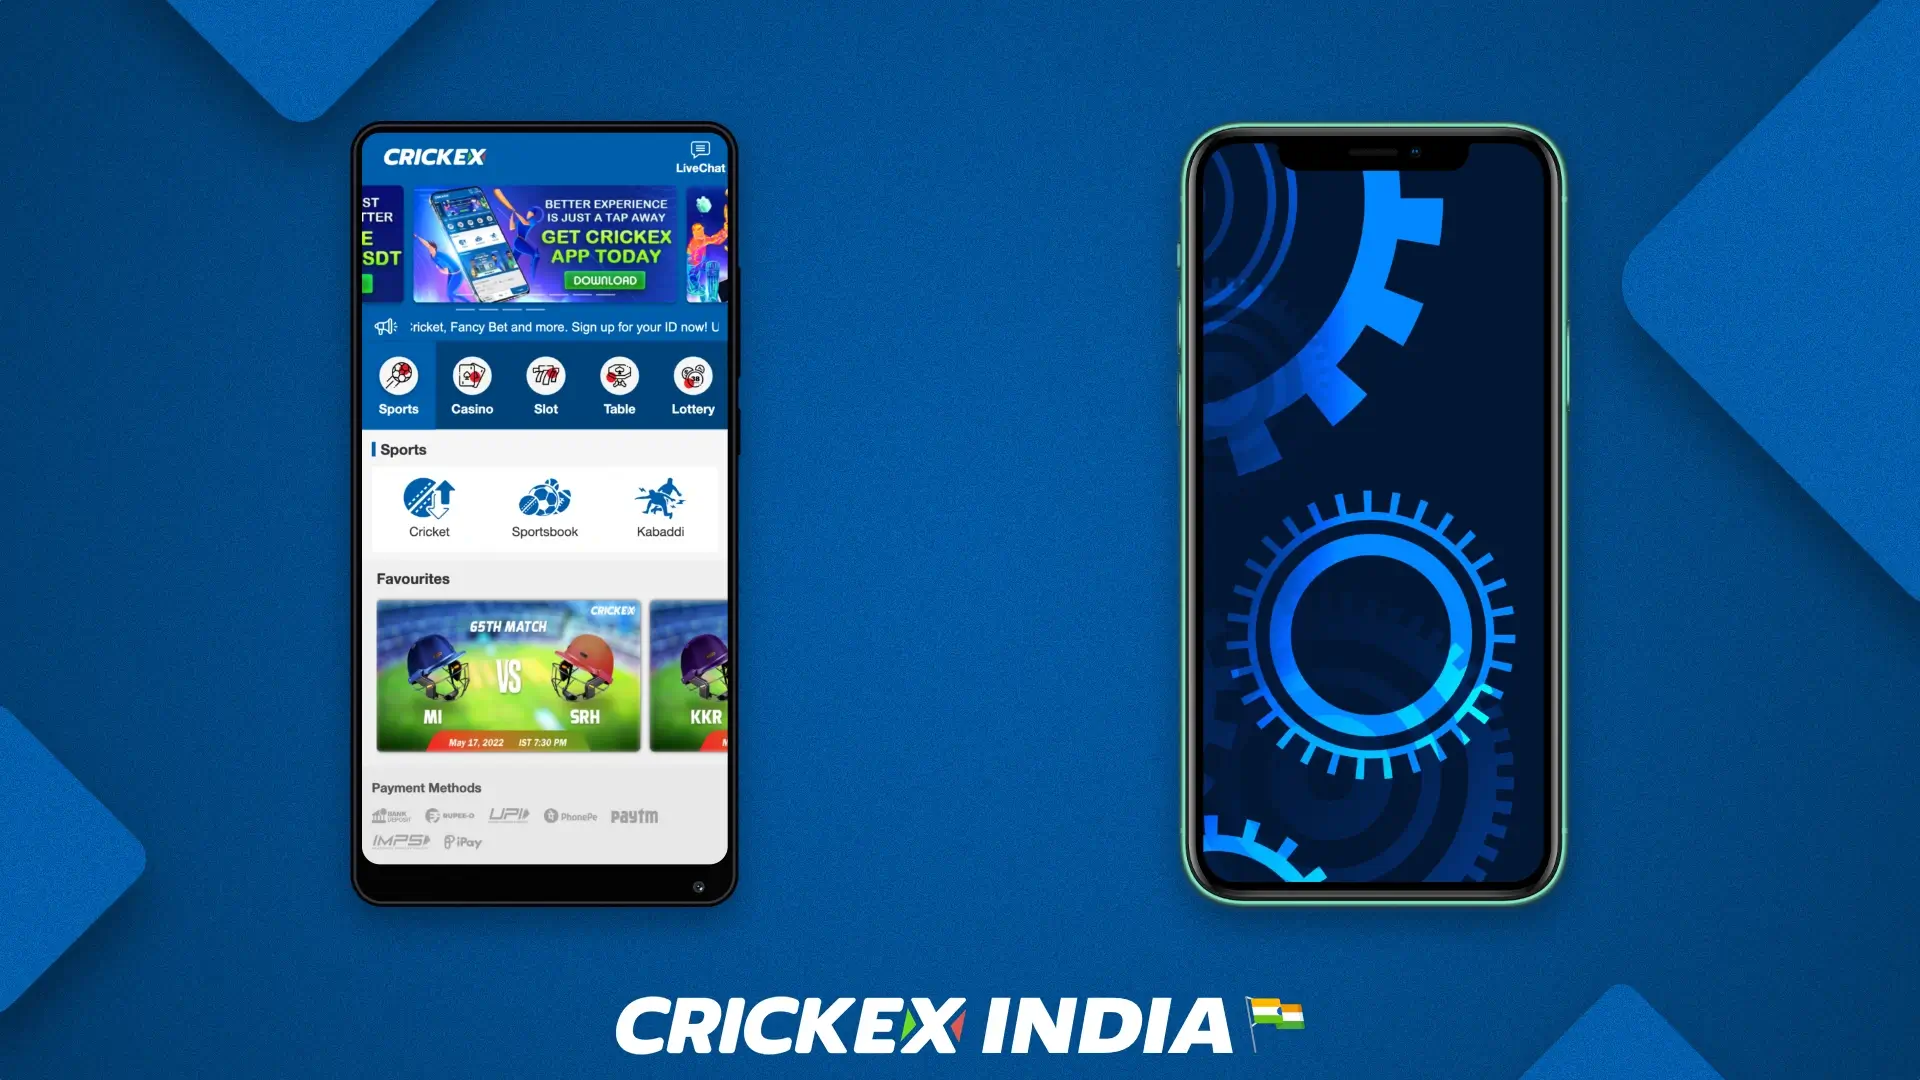 The main characteristics of the Crickex mobile application for sports betting and casino games